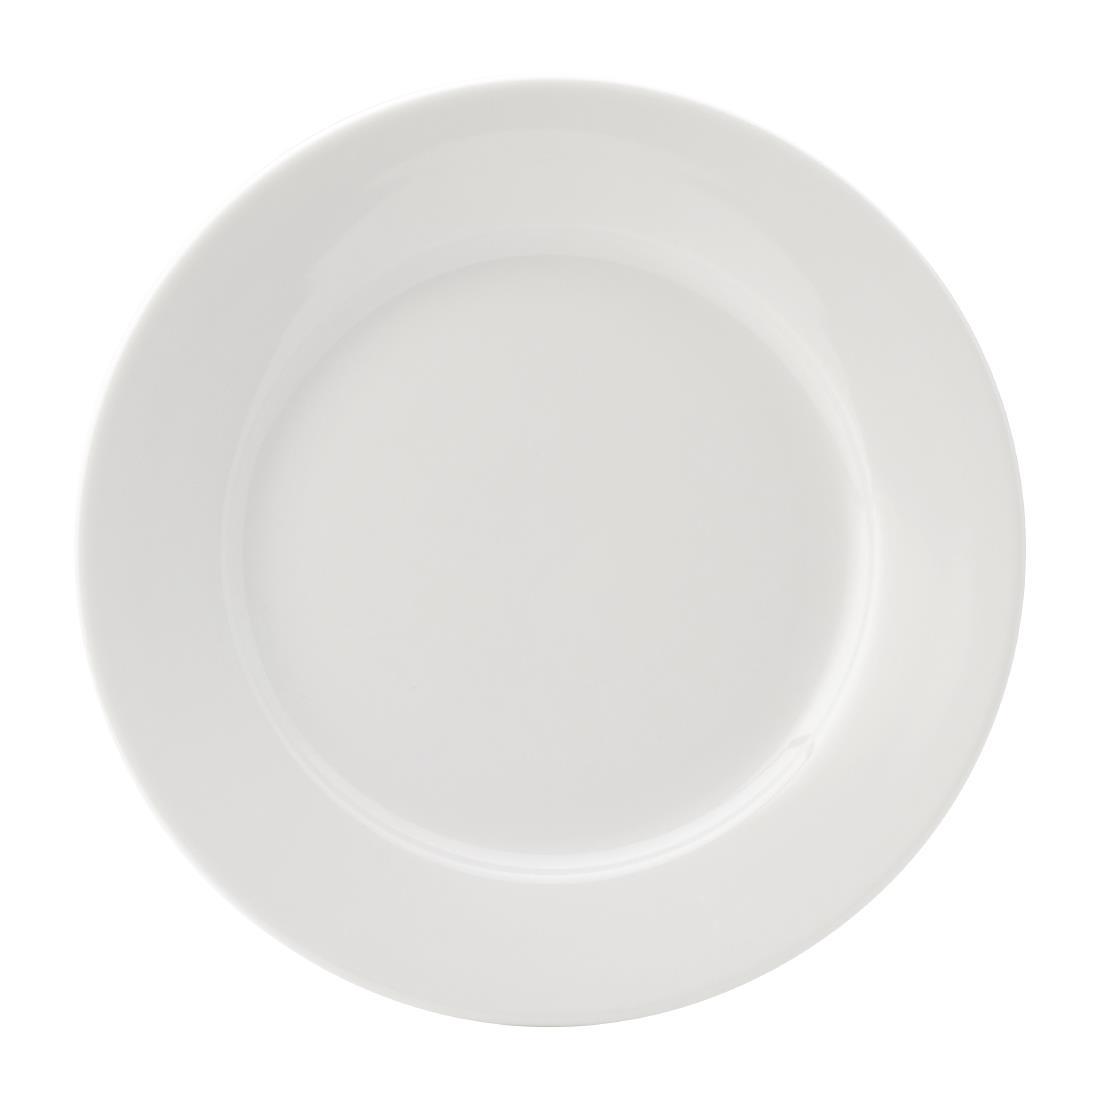 Utopia Titan Winged Plates White 210mm (Pack of 24) - DY342  - 1